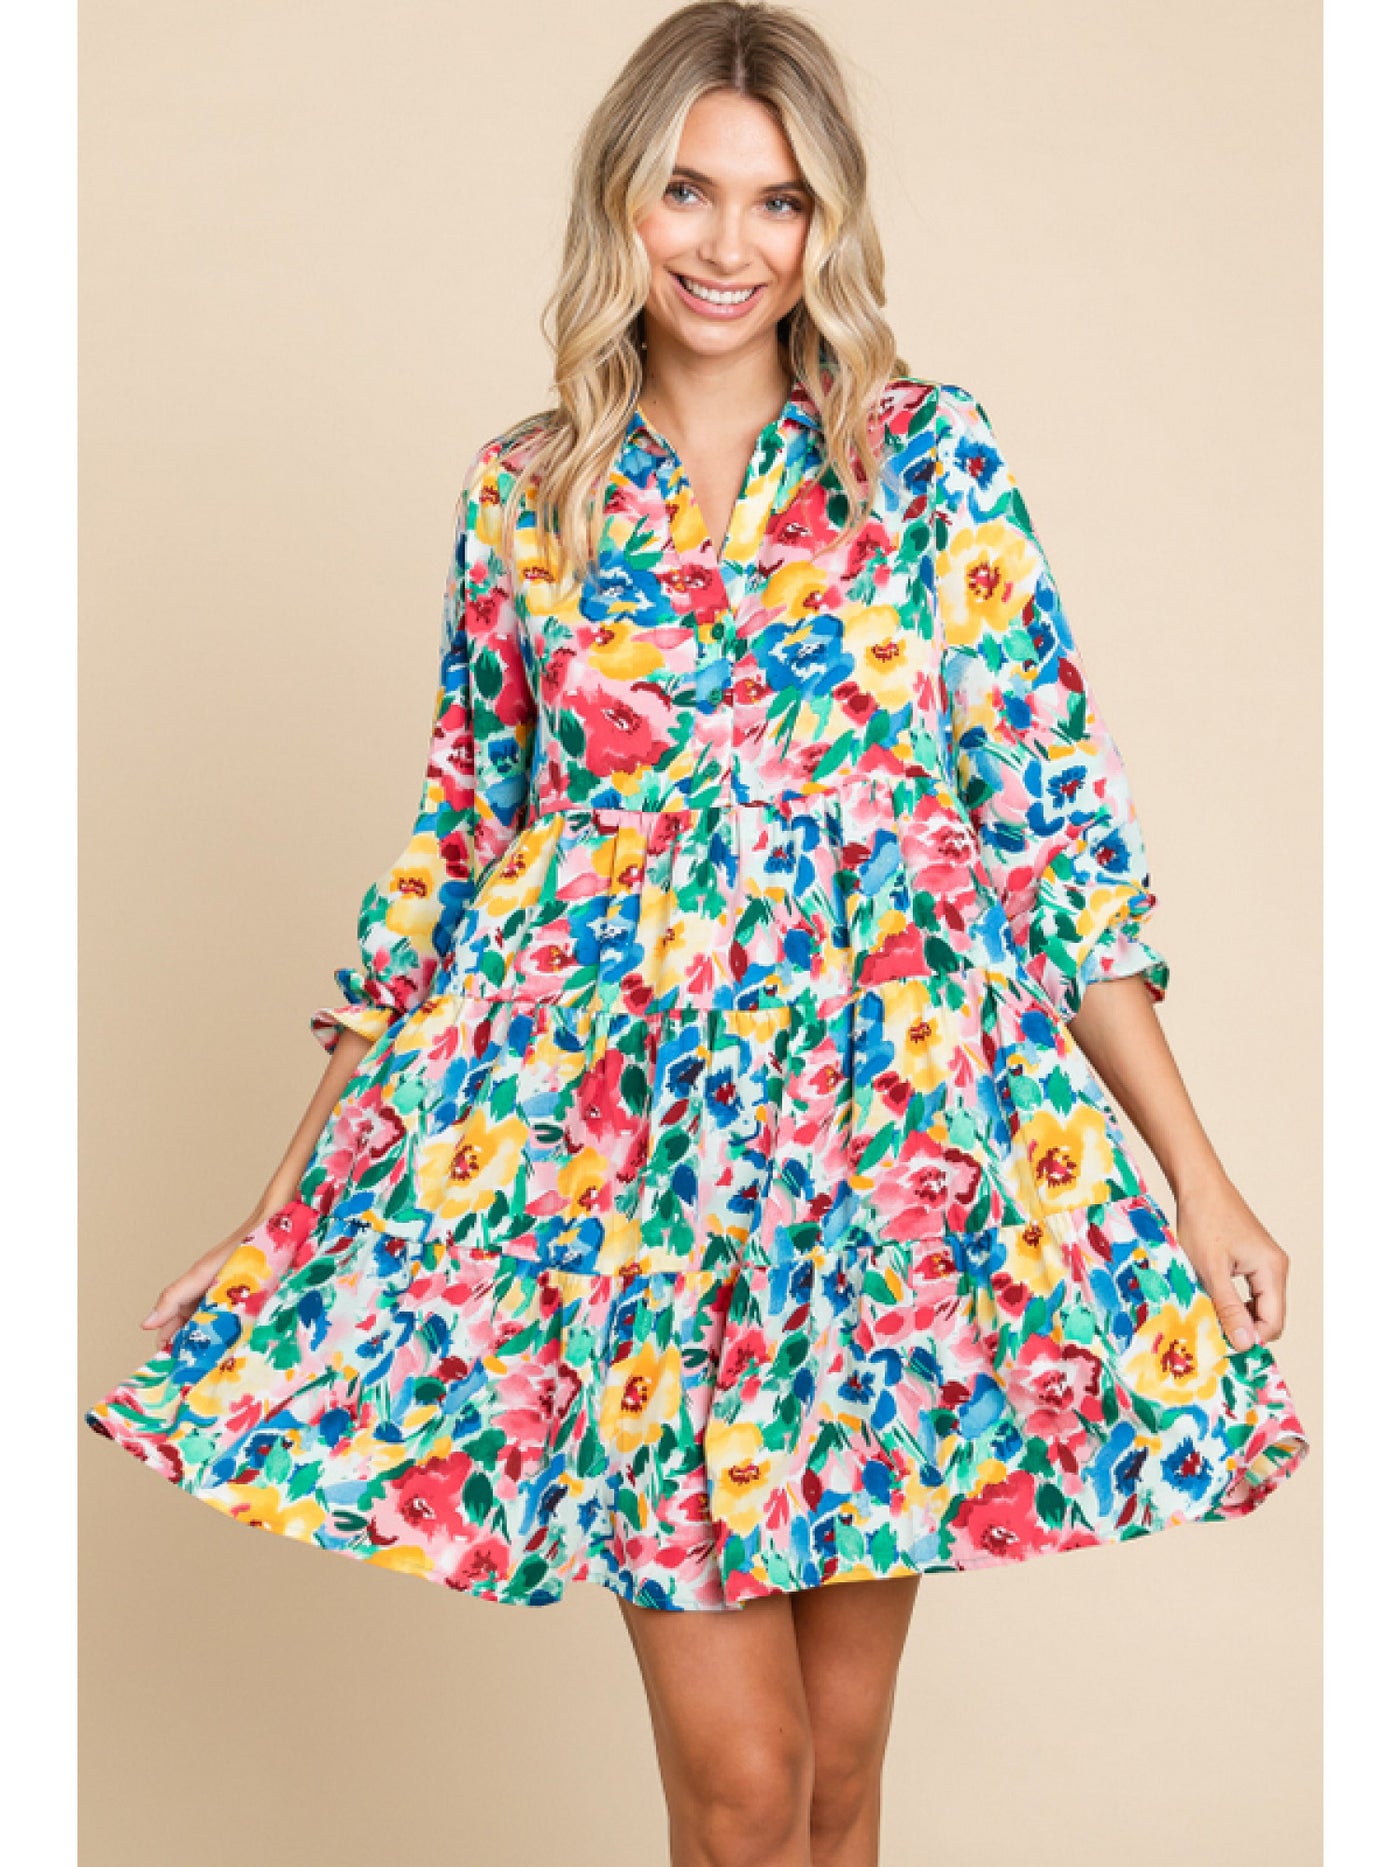 Kelly Green Floral Print Dress with Buttoned Collar Neck